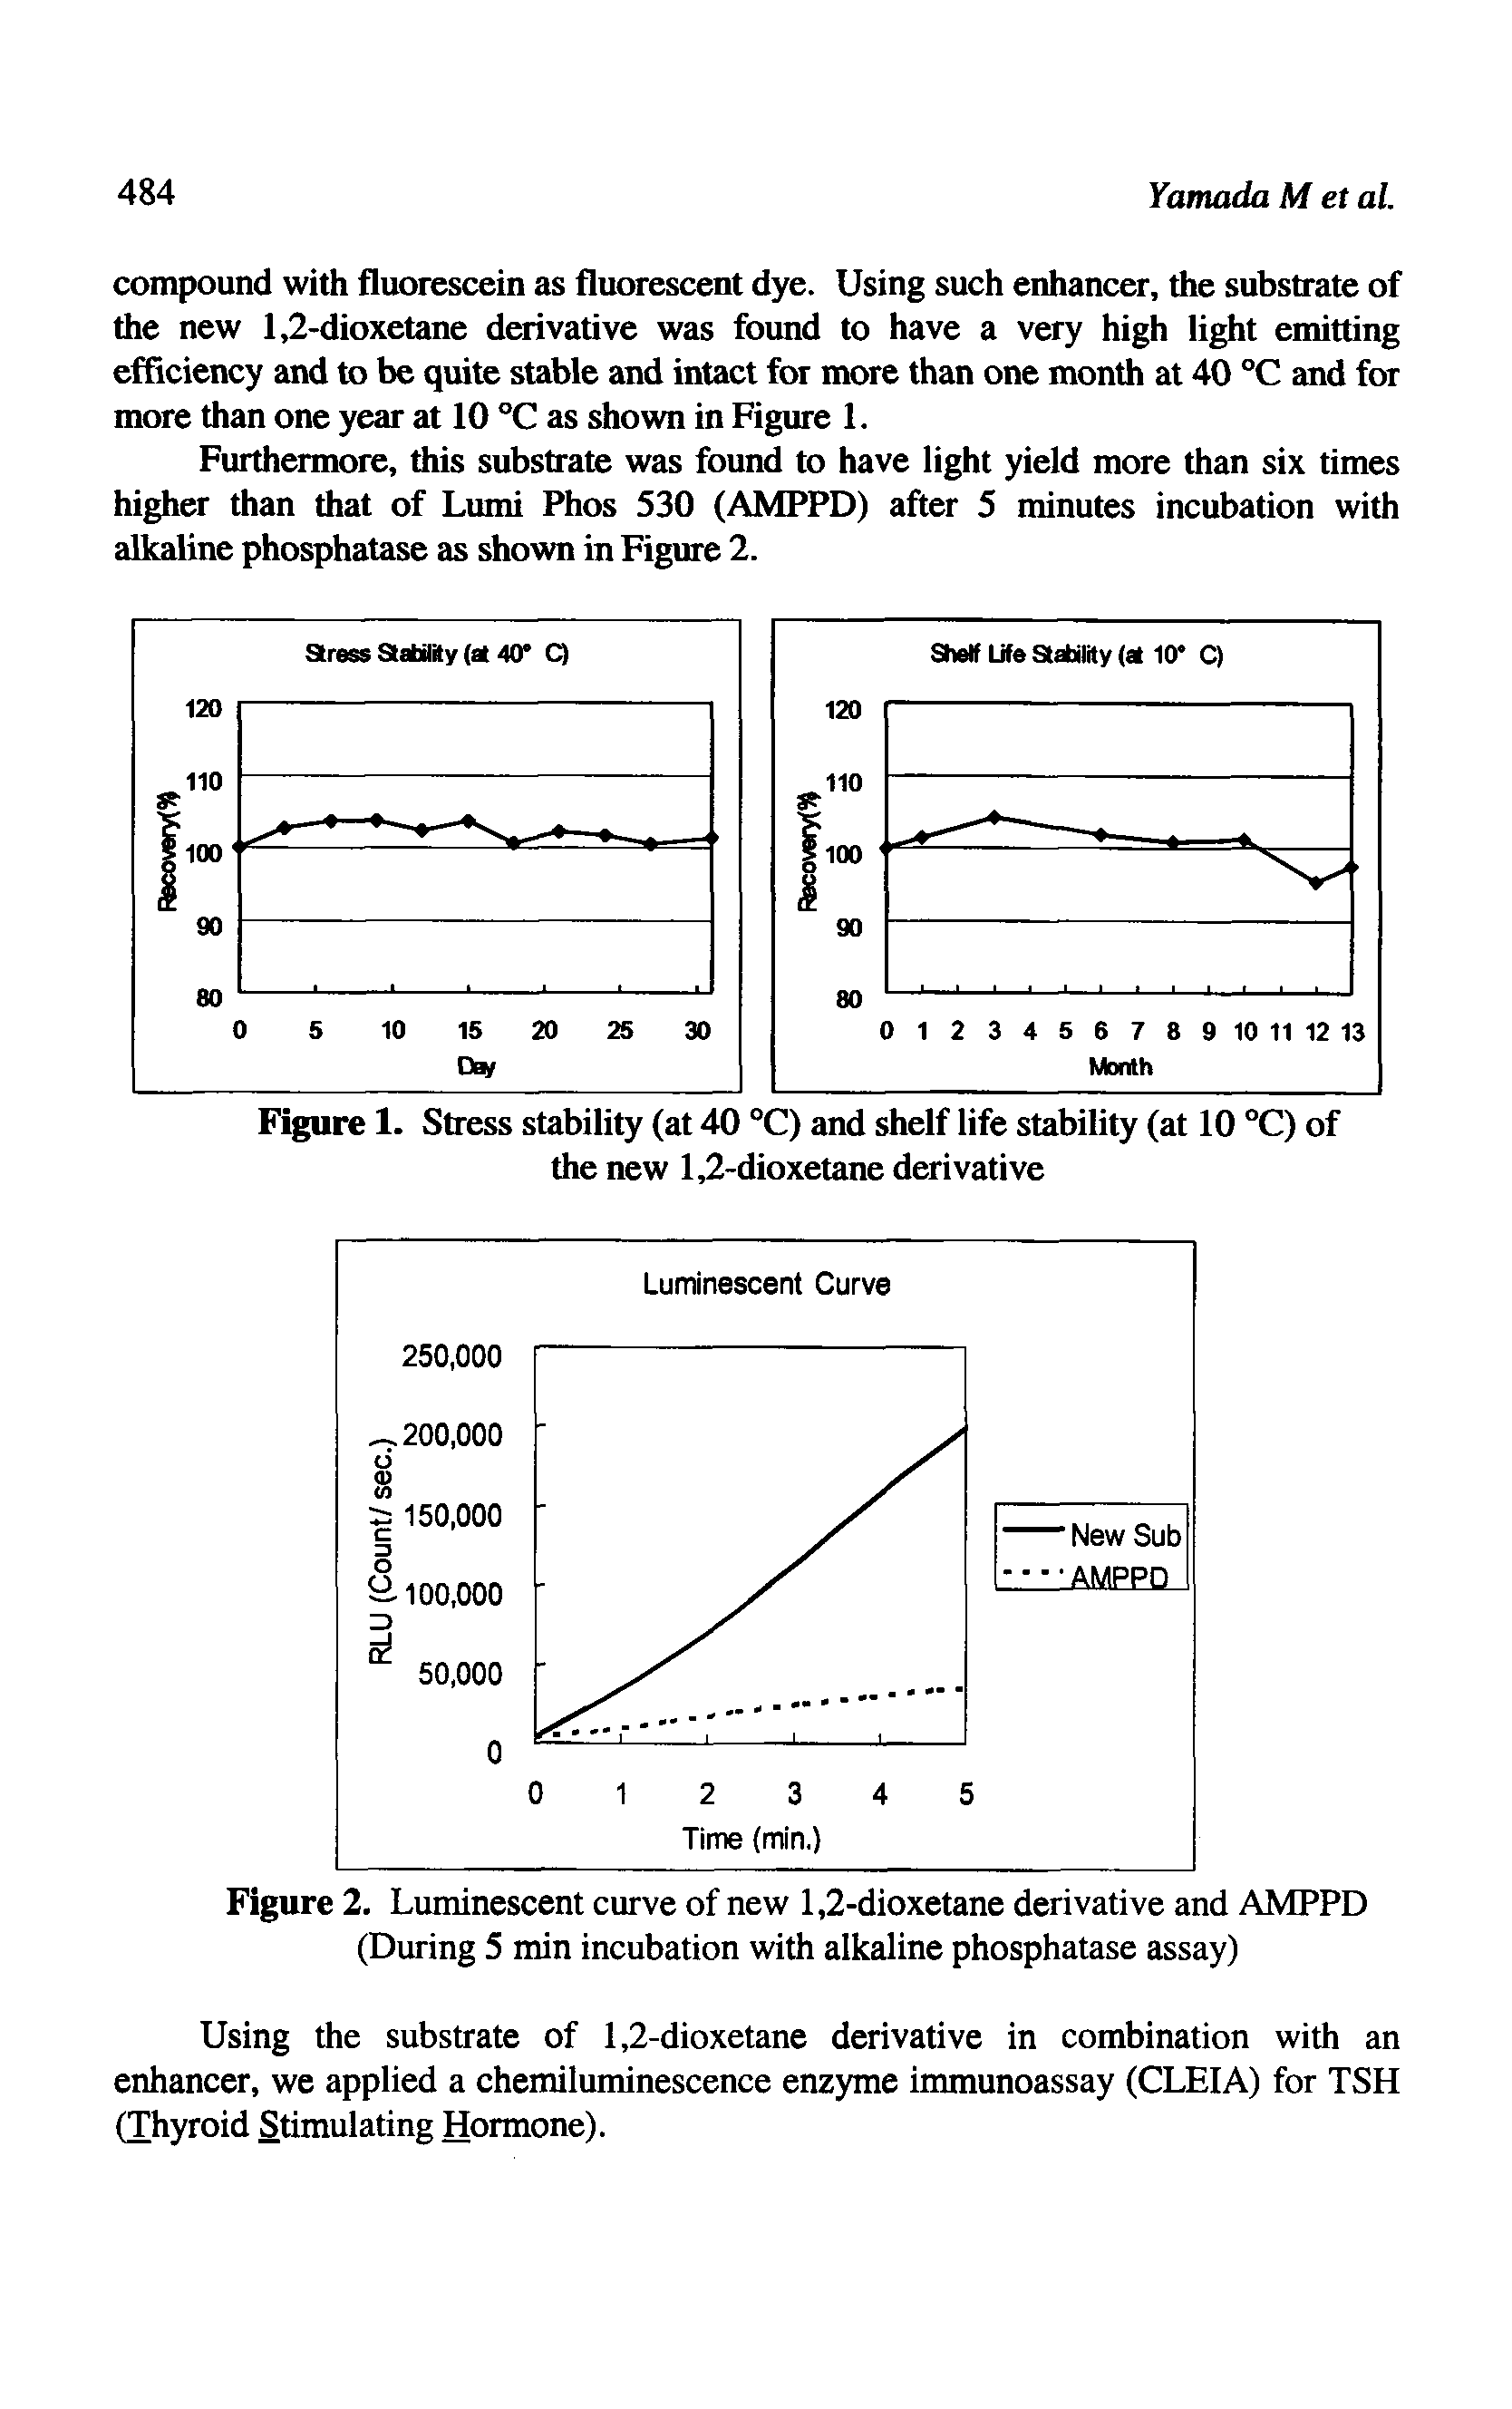 Figure 1. Stress stability (at 40 °C) and shelf life stability (at 10 °C) of the new 1,2-dioxetane derivative...